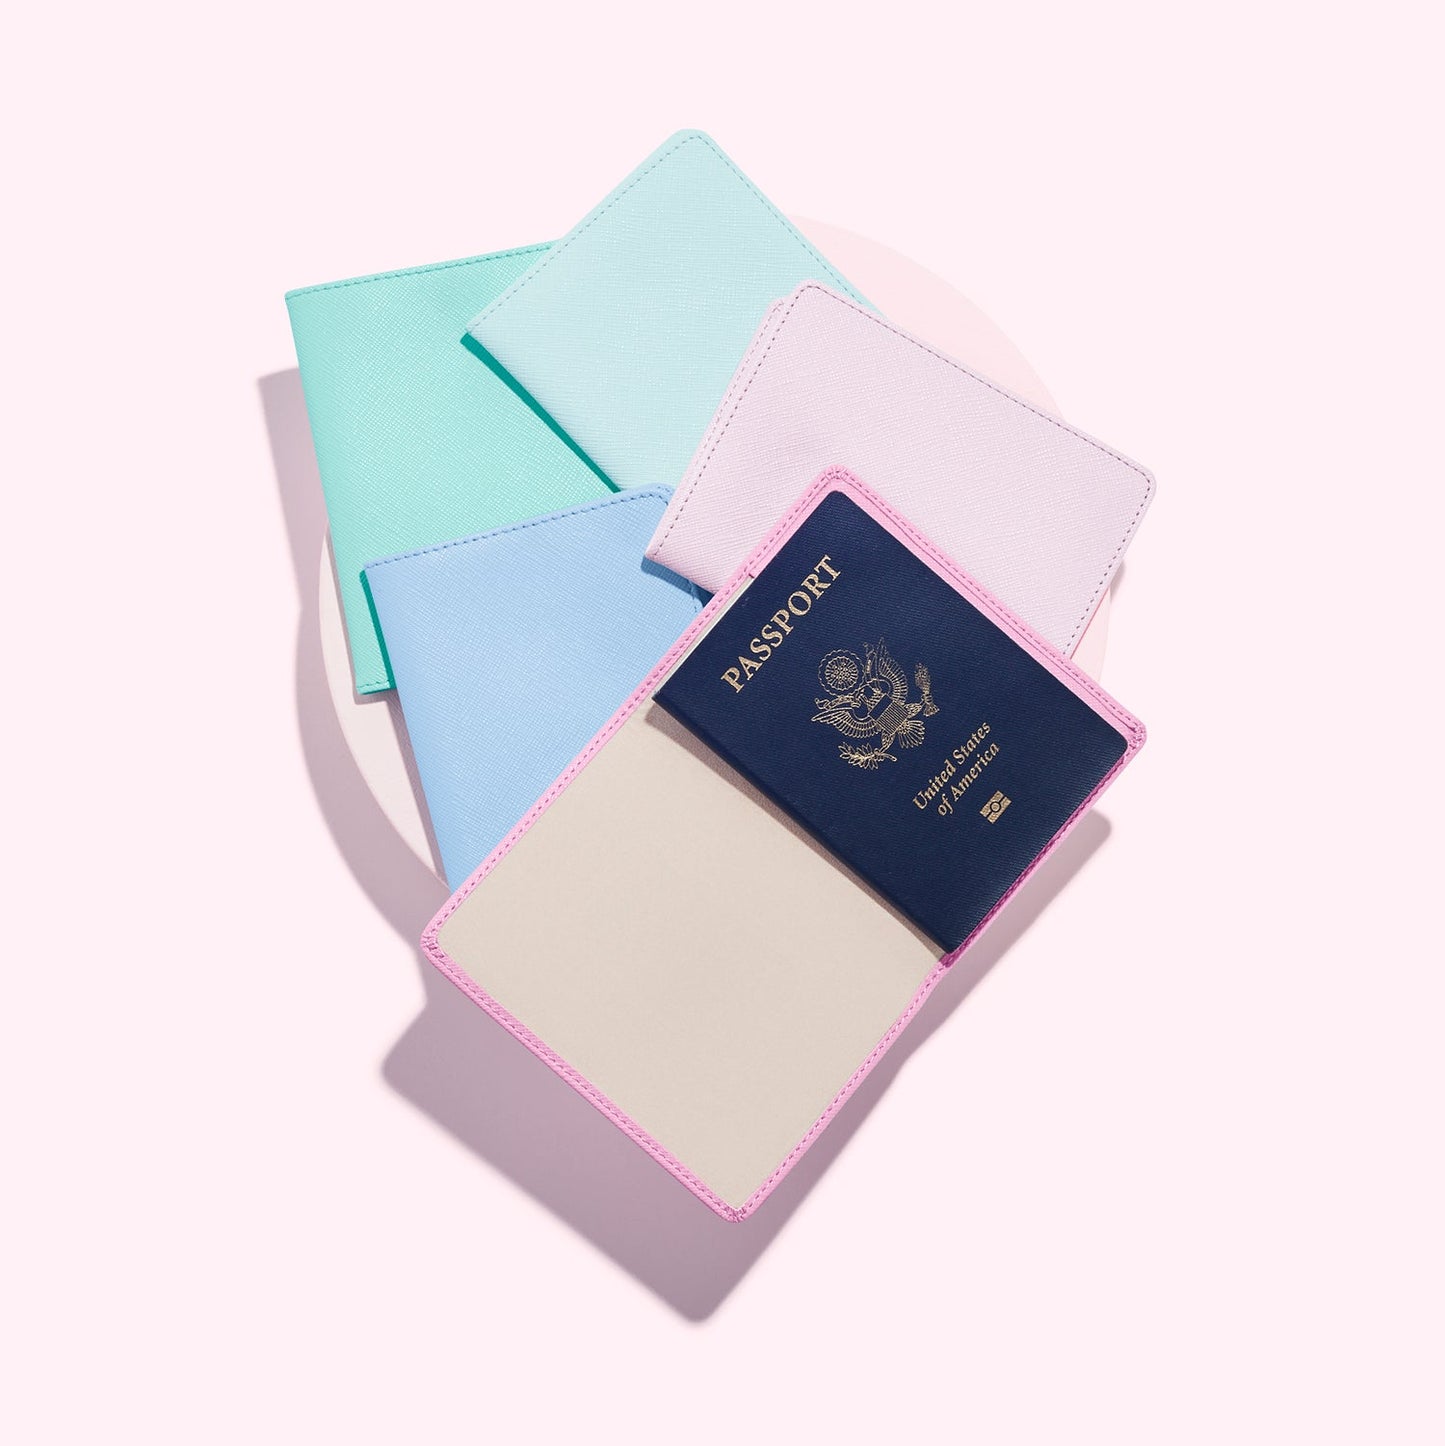 Travel accessories - the best passport covers, personalised luggage tags  and more